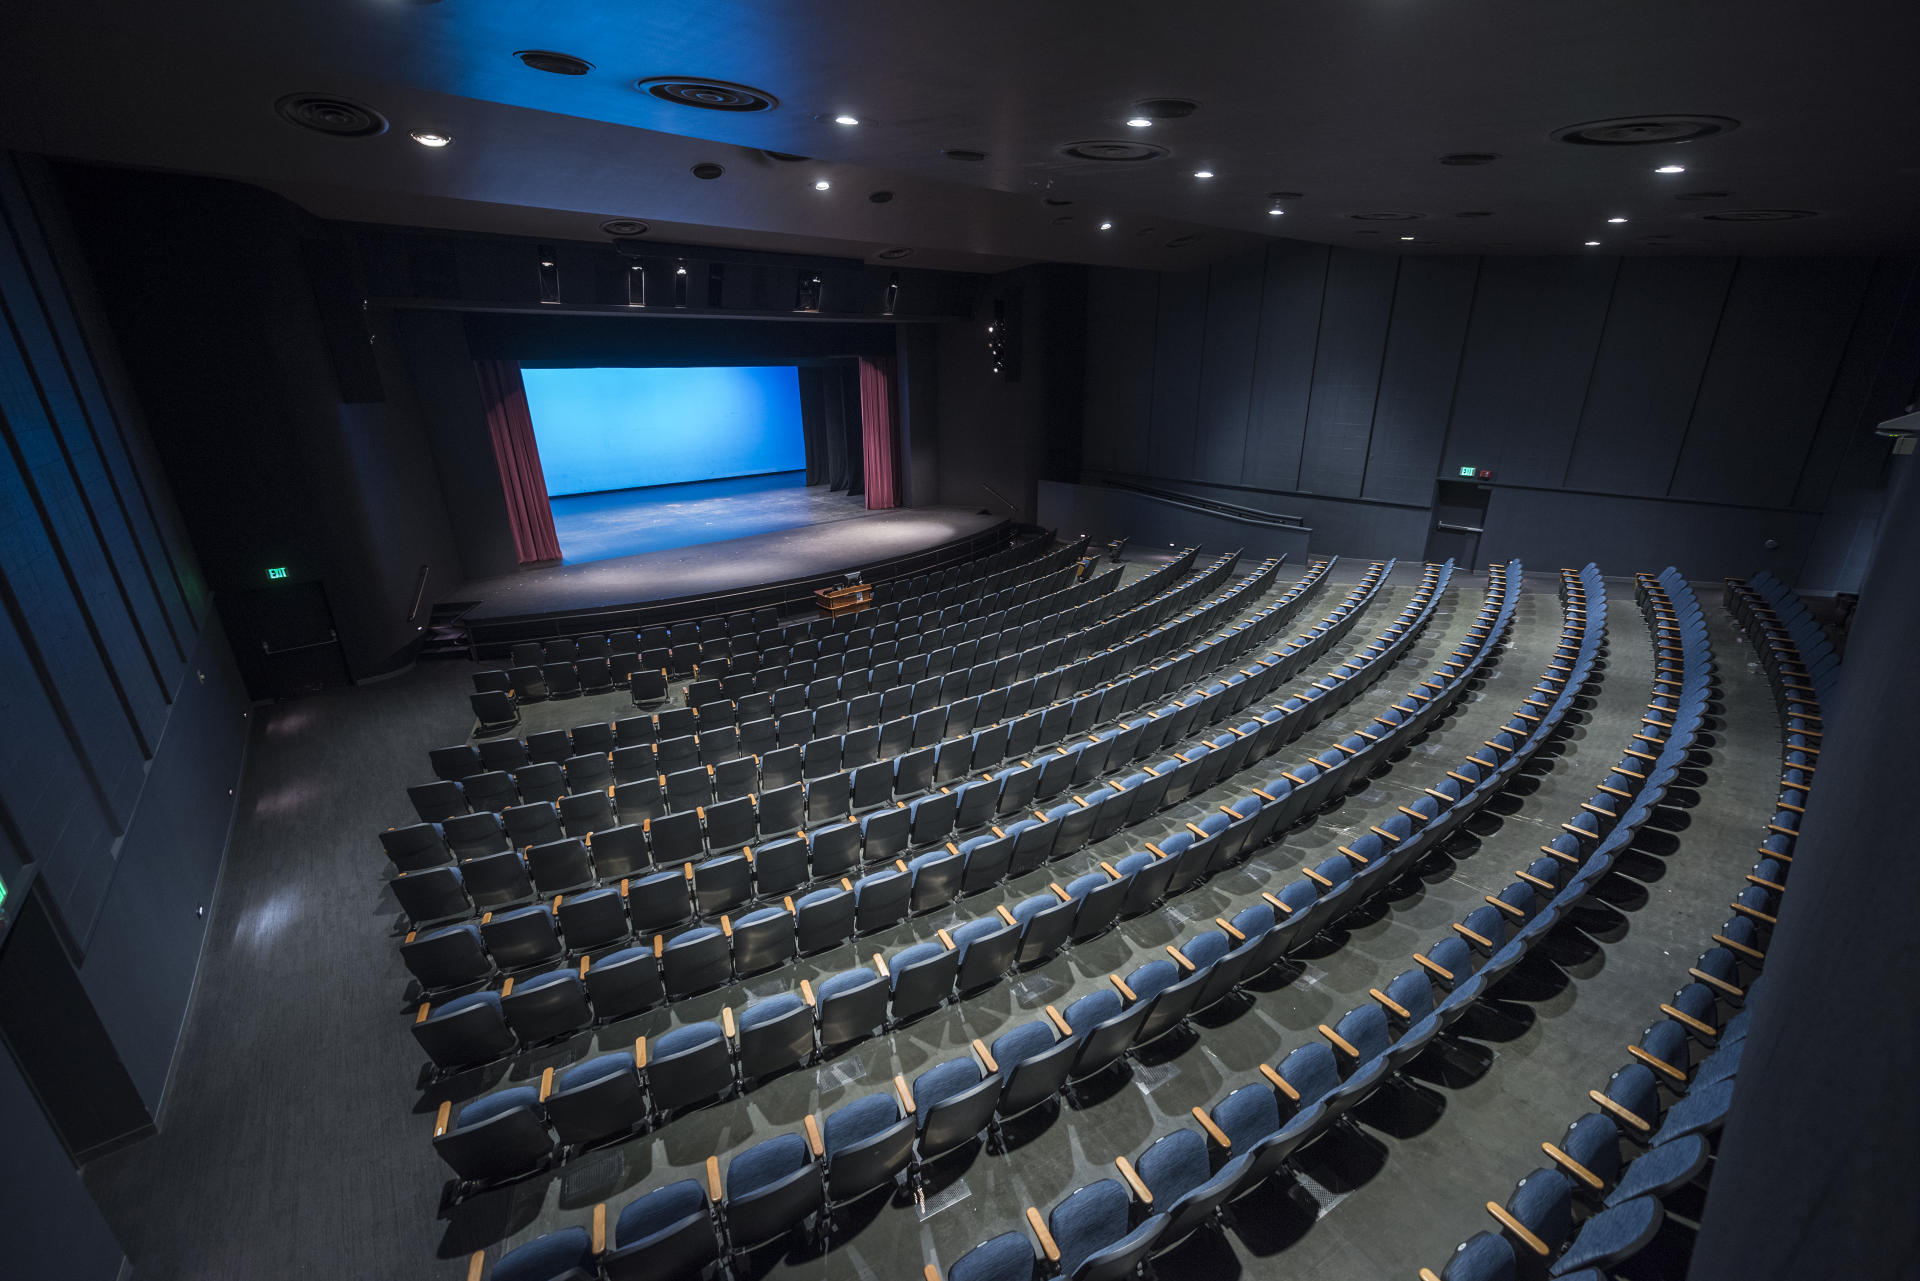 The Harlan Adams Theatre with 486 blue seats